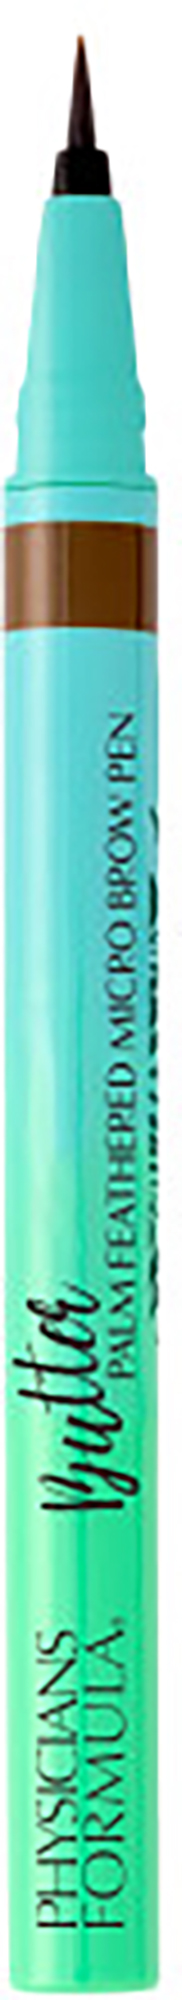 Physicians Formula Butter Palm Feathered Micro Brow Pen - Universal Brown